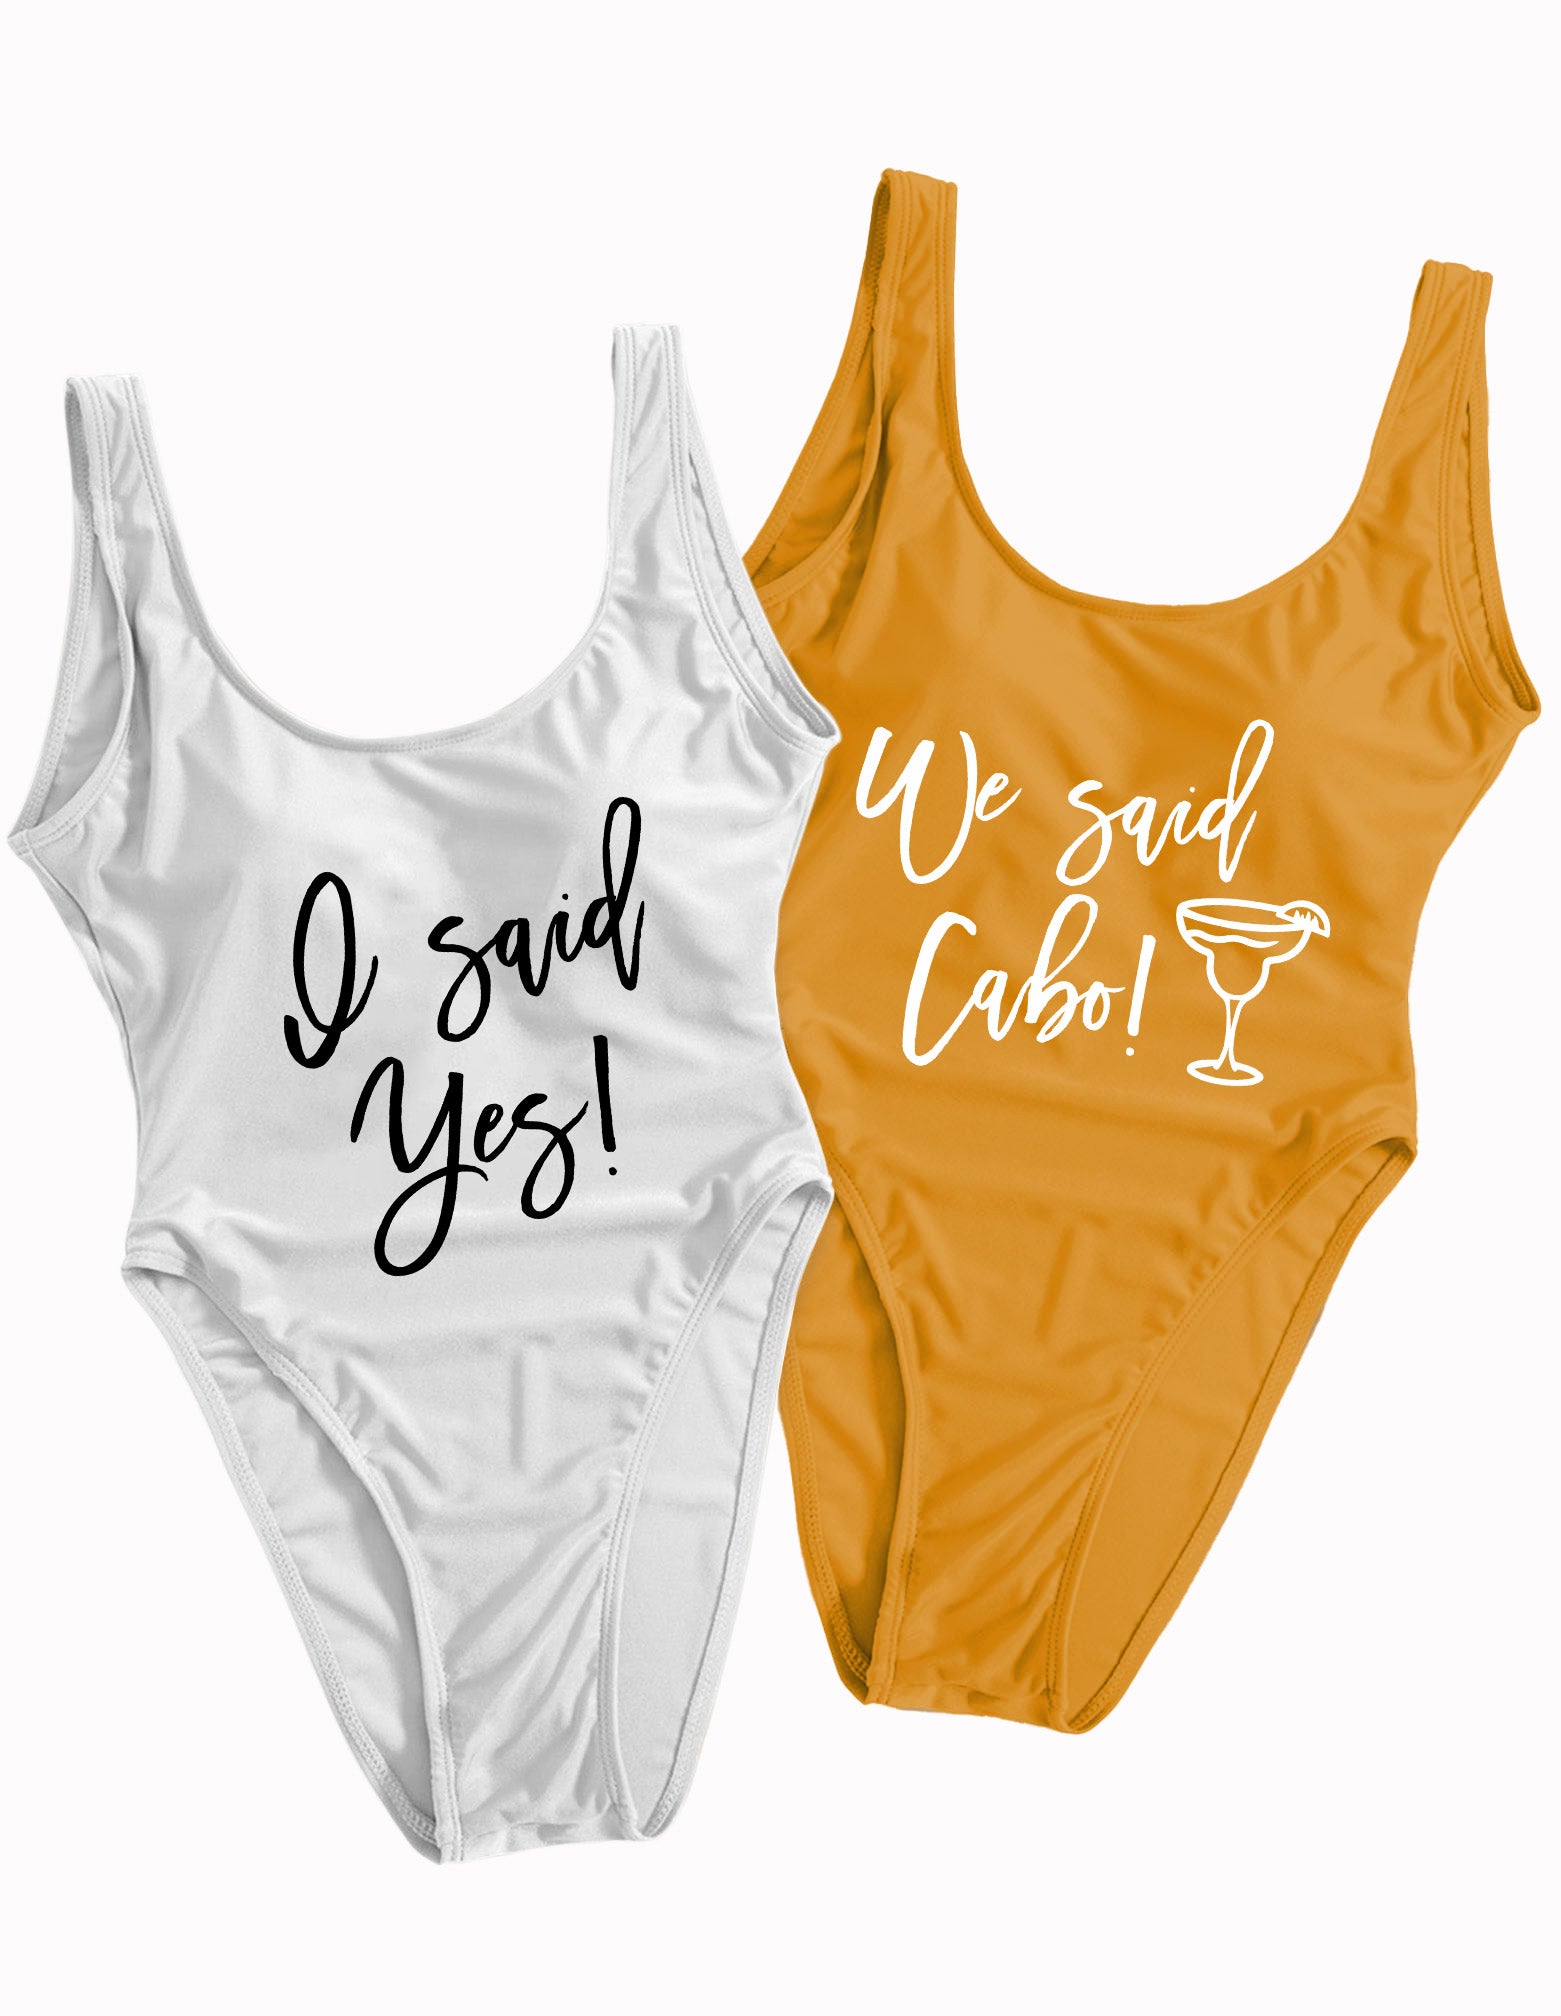 Cabo Swimsuits